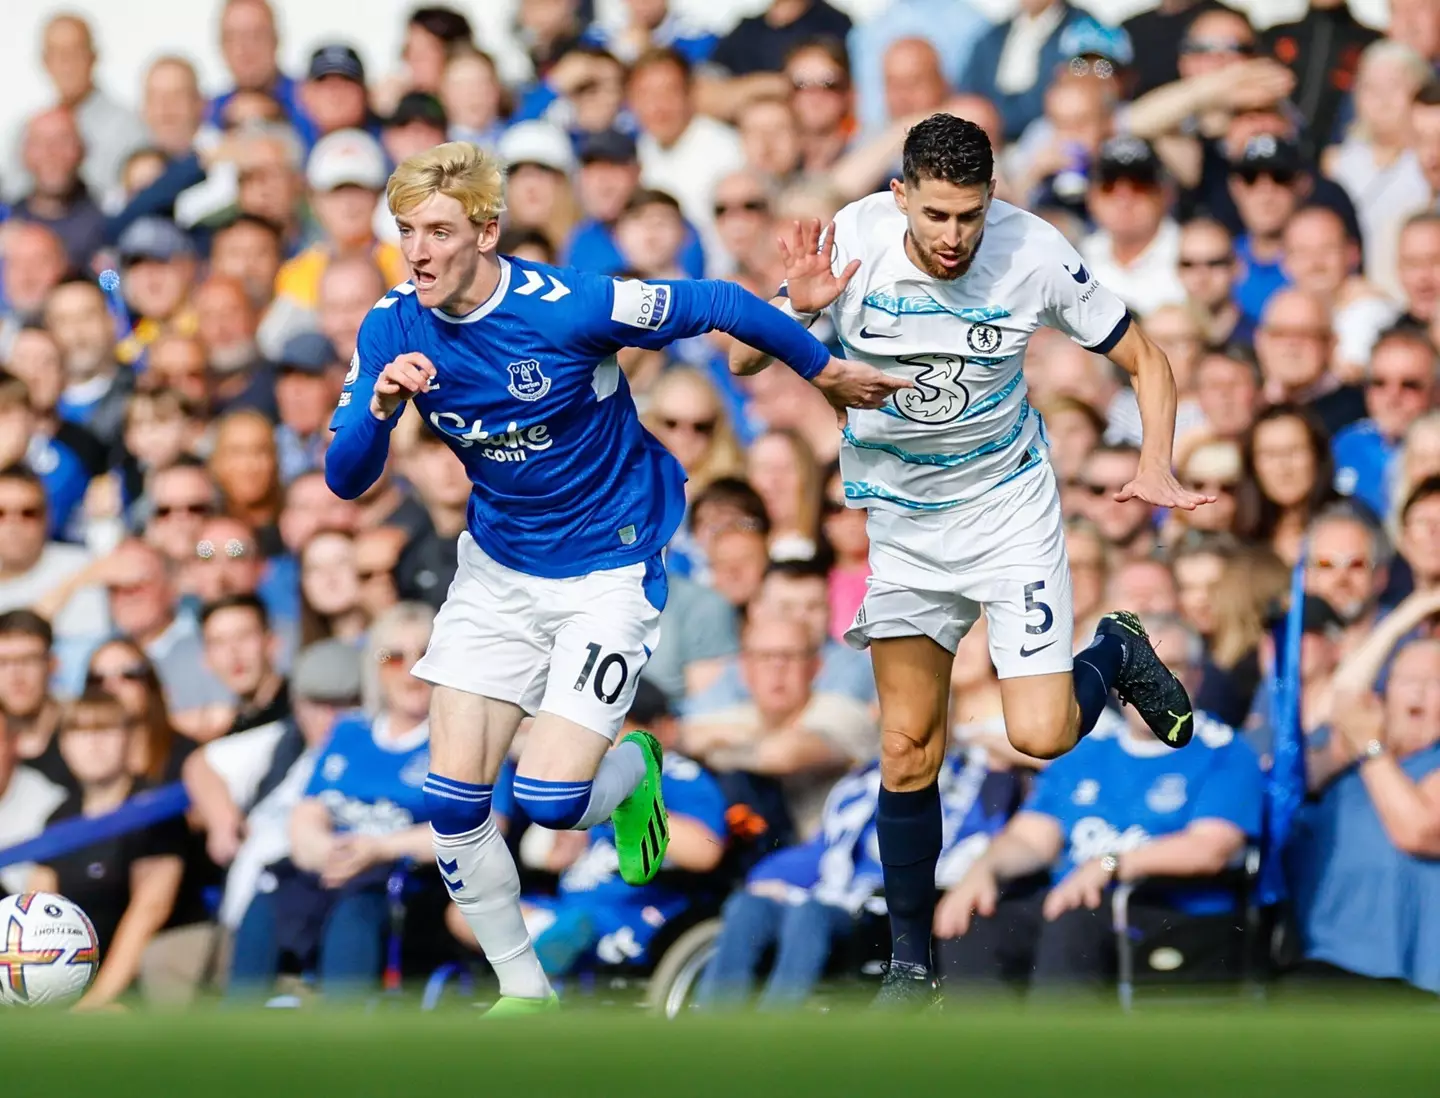 Gordon attempting to get away from Chelsea midfielder Jorginho in this season's encounter at Goodison Park. (Alamy)